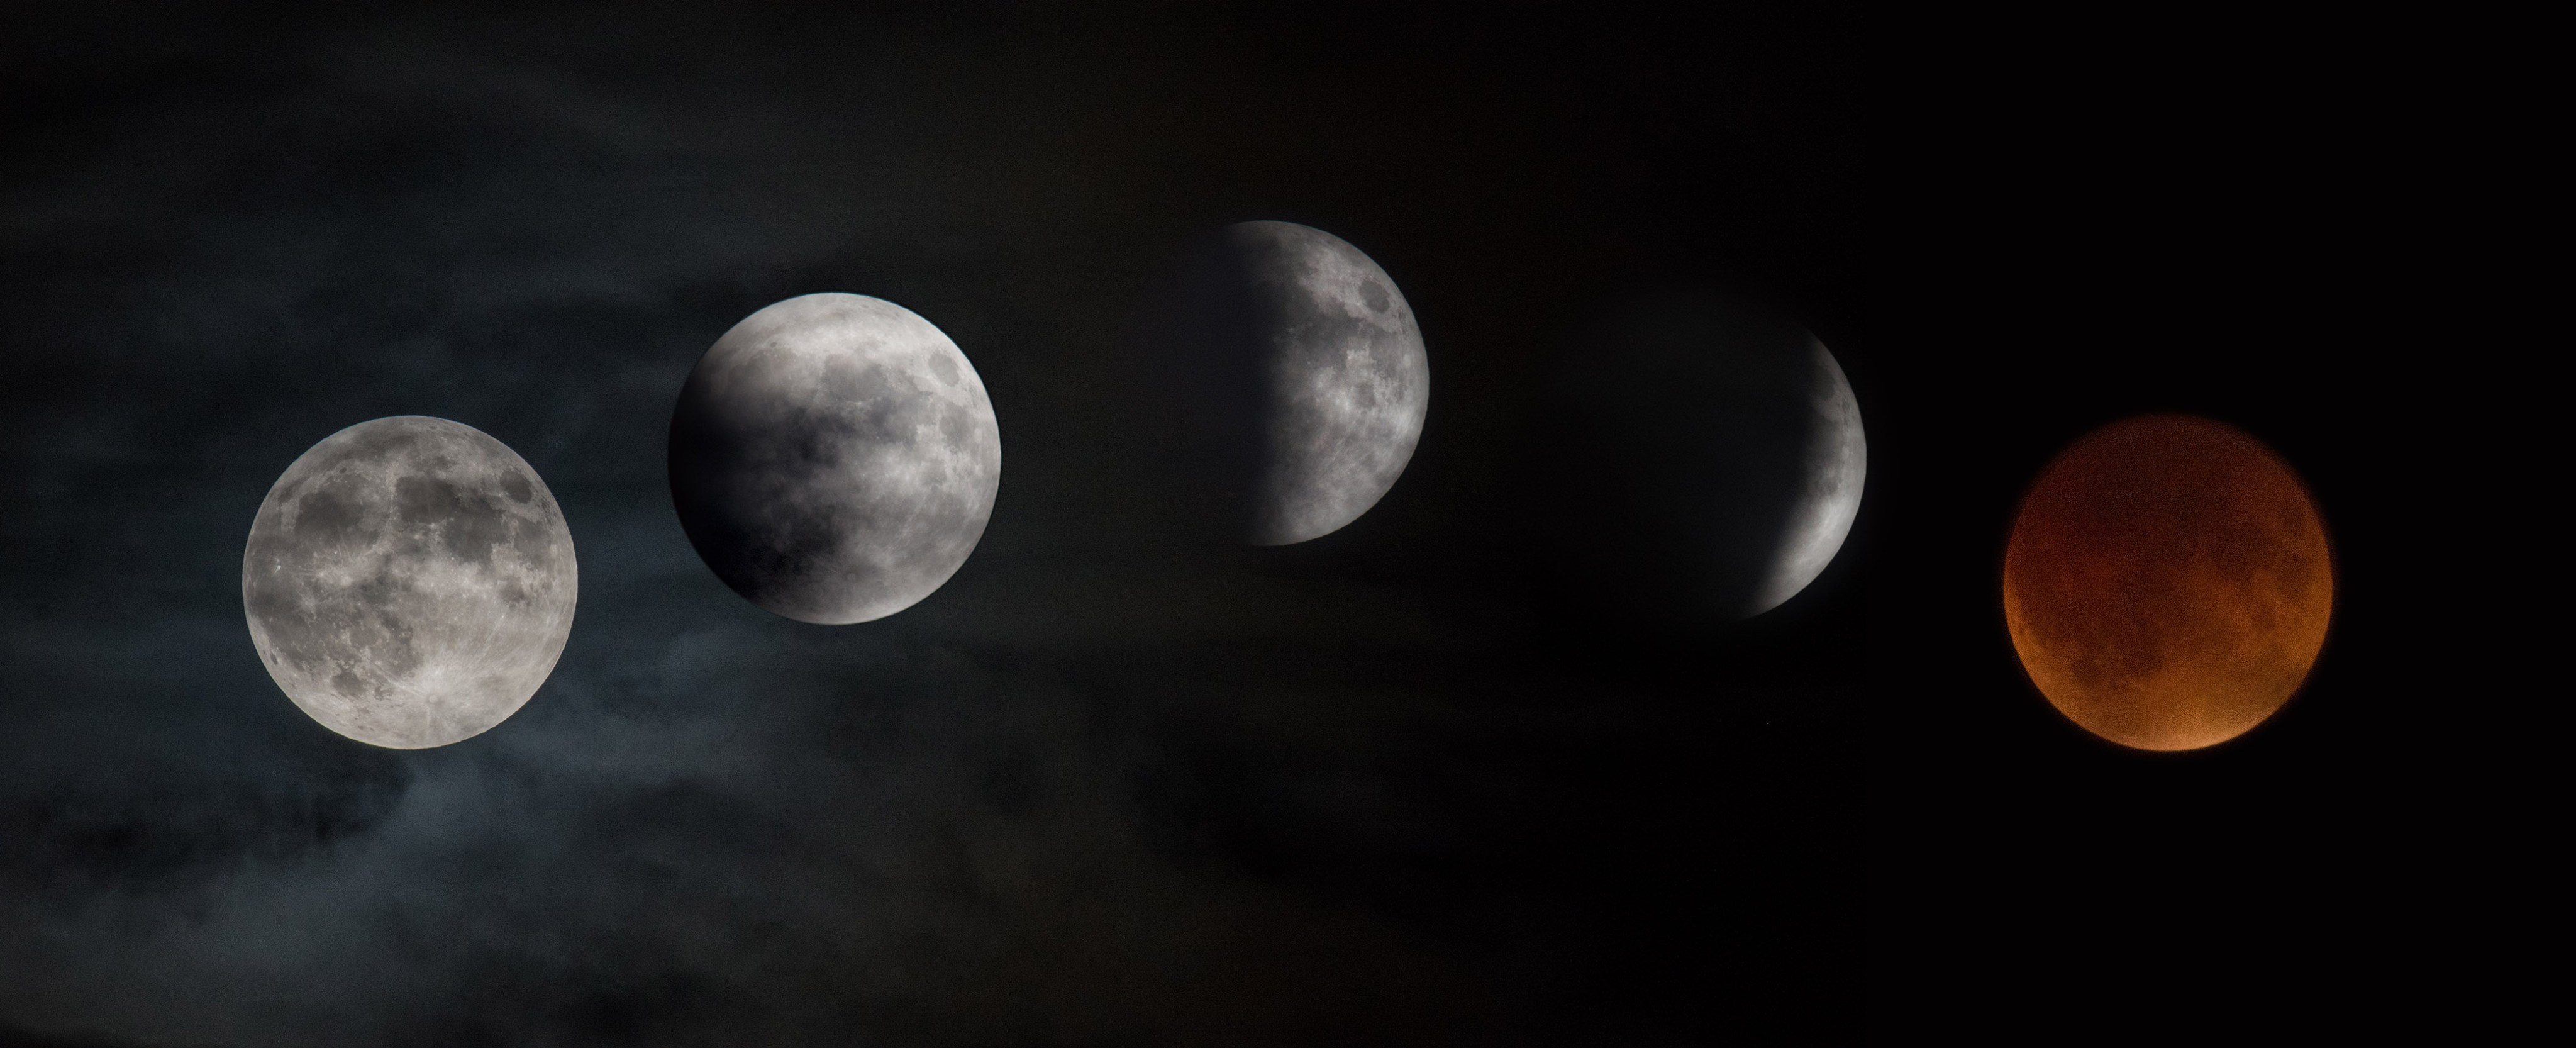 Composite image of supermoon lunar eclipse over time